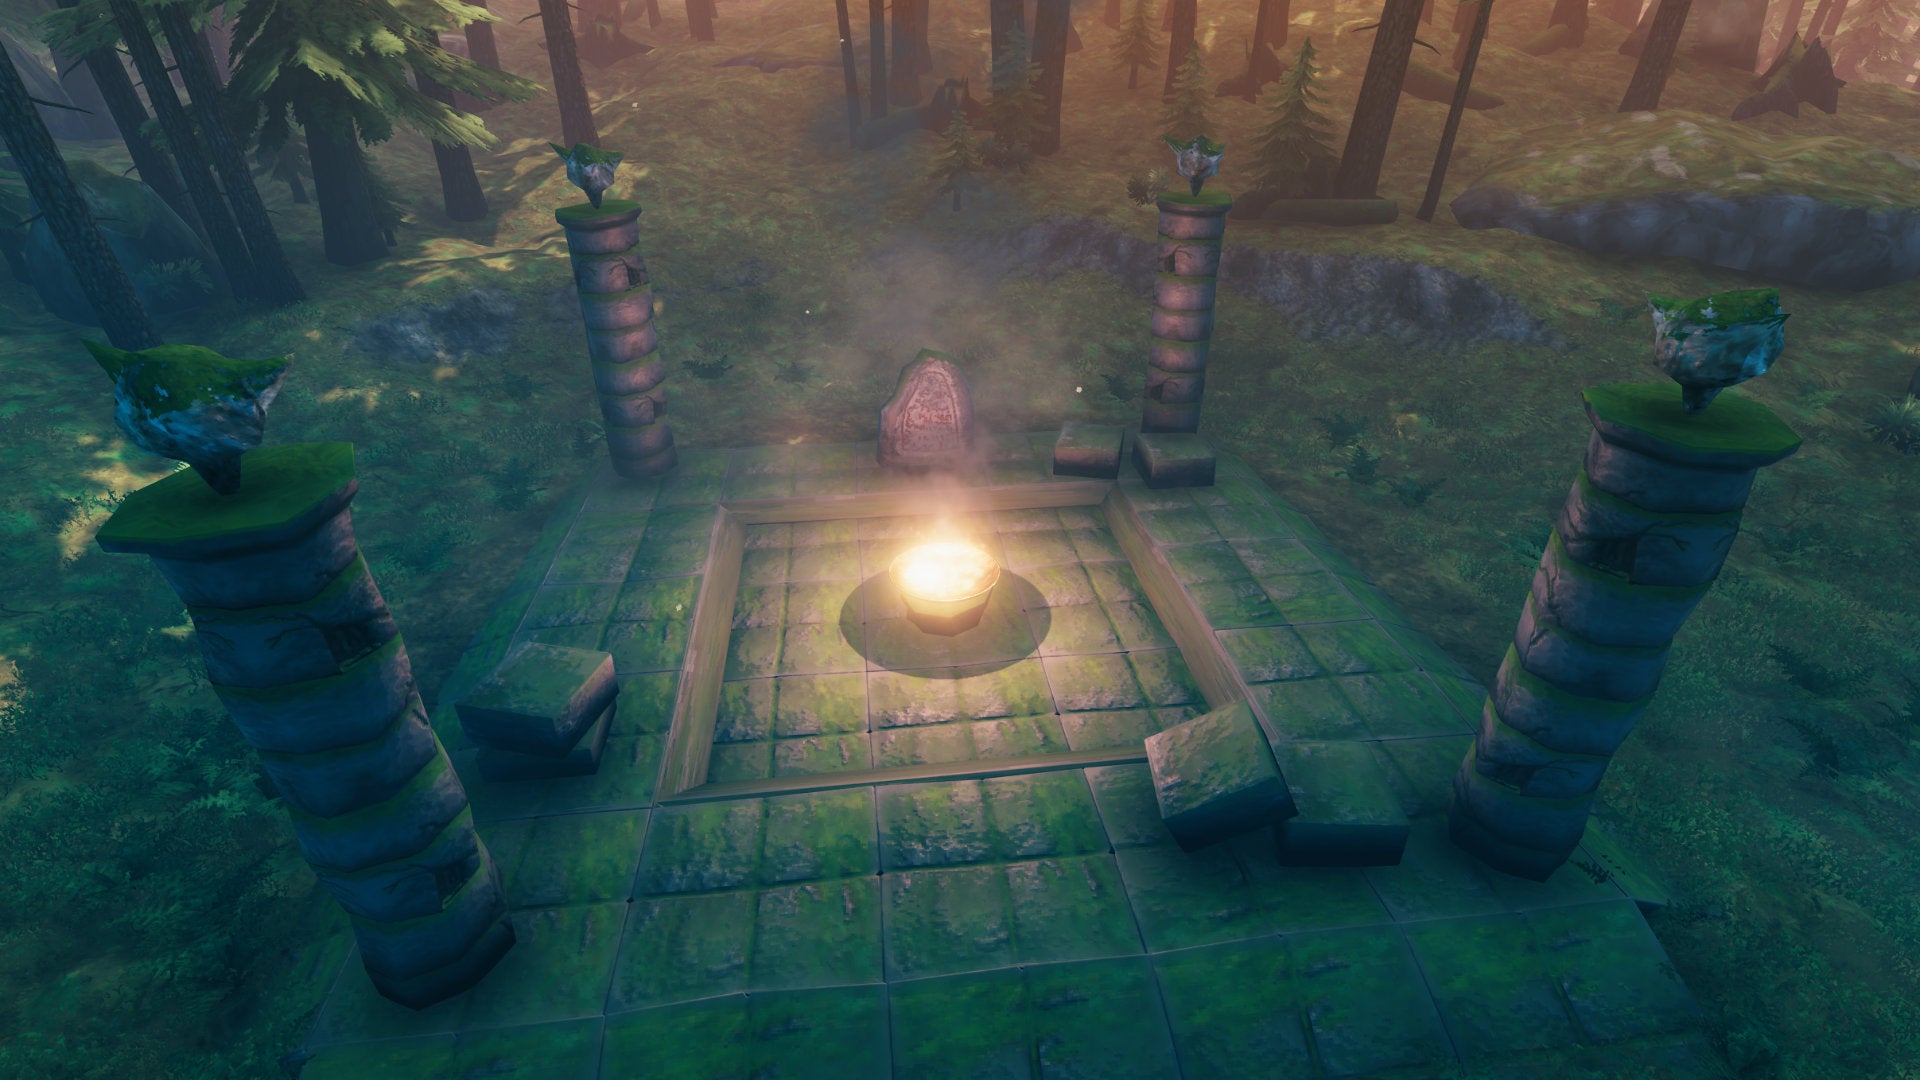 A Valheim screenshot of a Mystical Altar for The Elder, the second boss. At its centre is a flaming bowl, surrounded by four pillars.